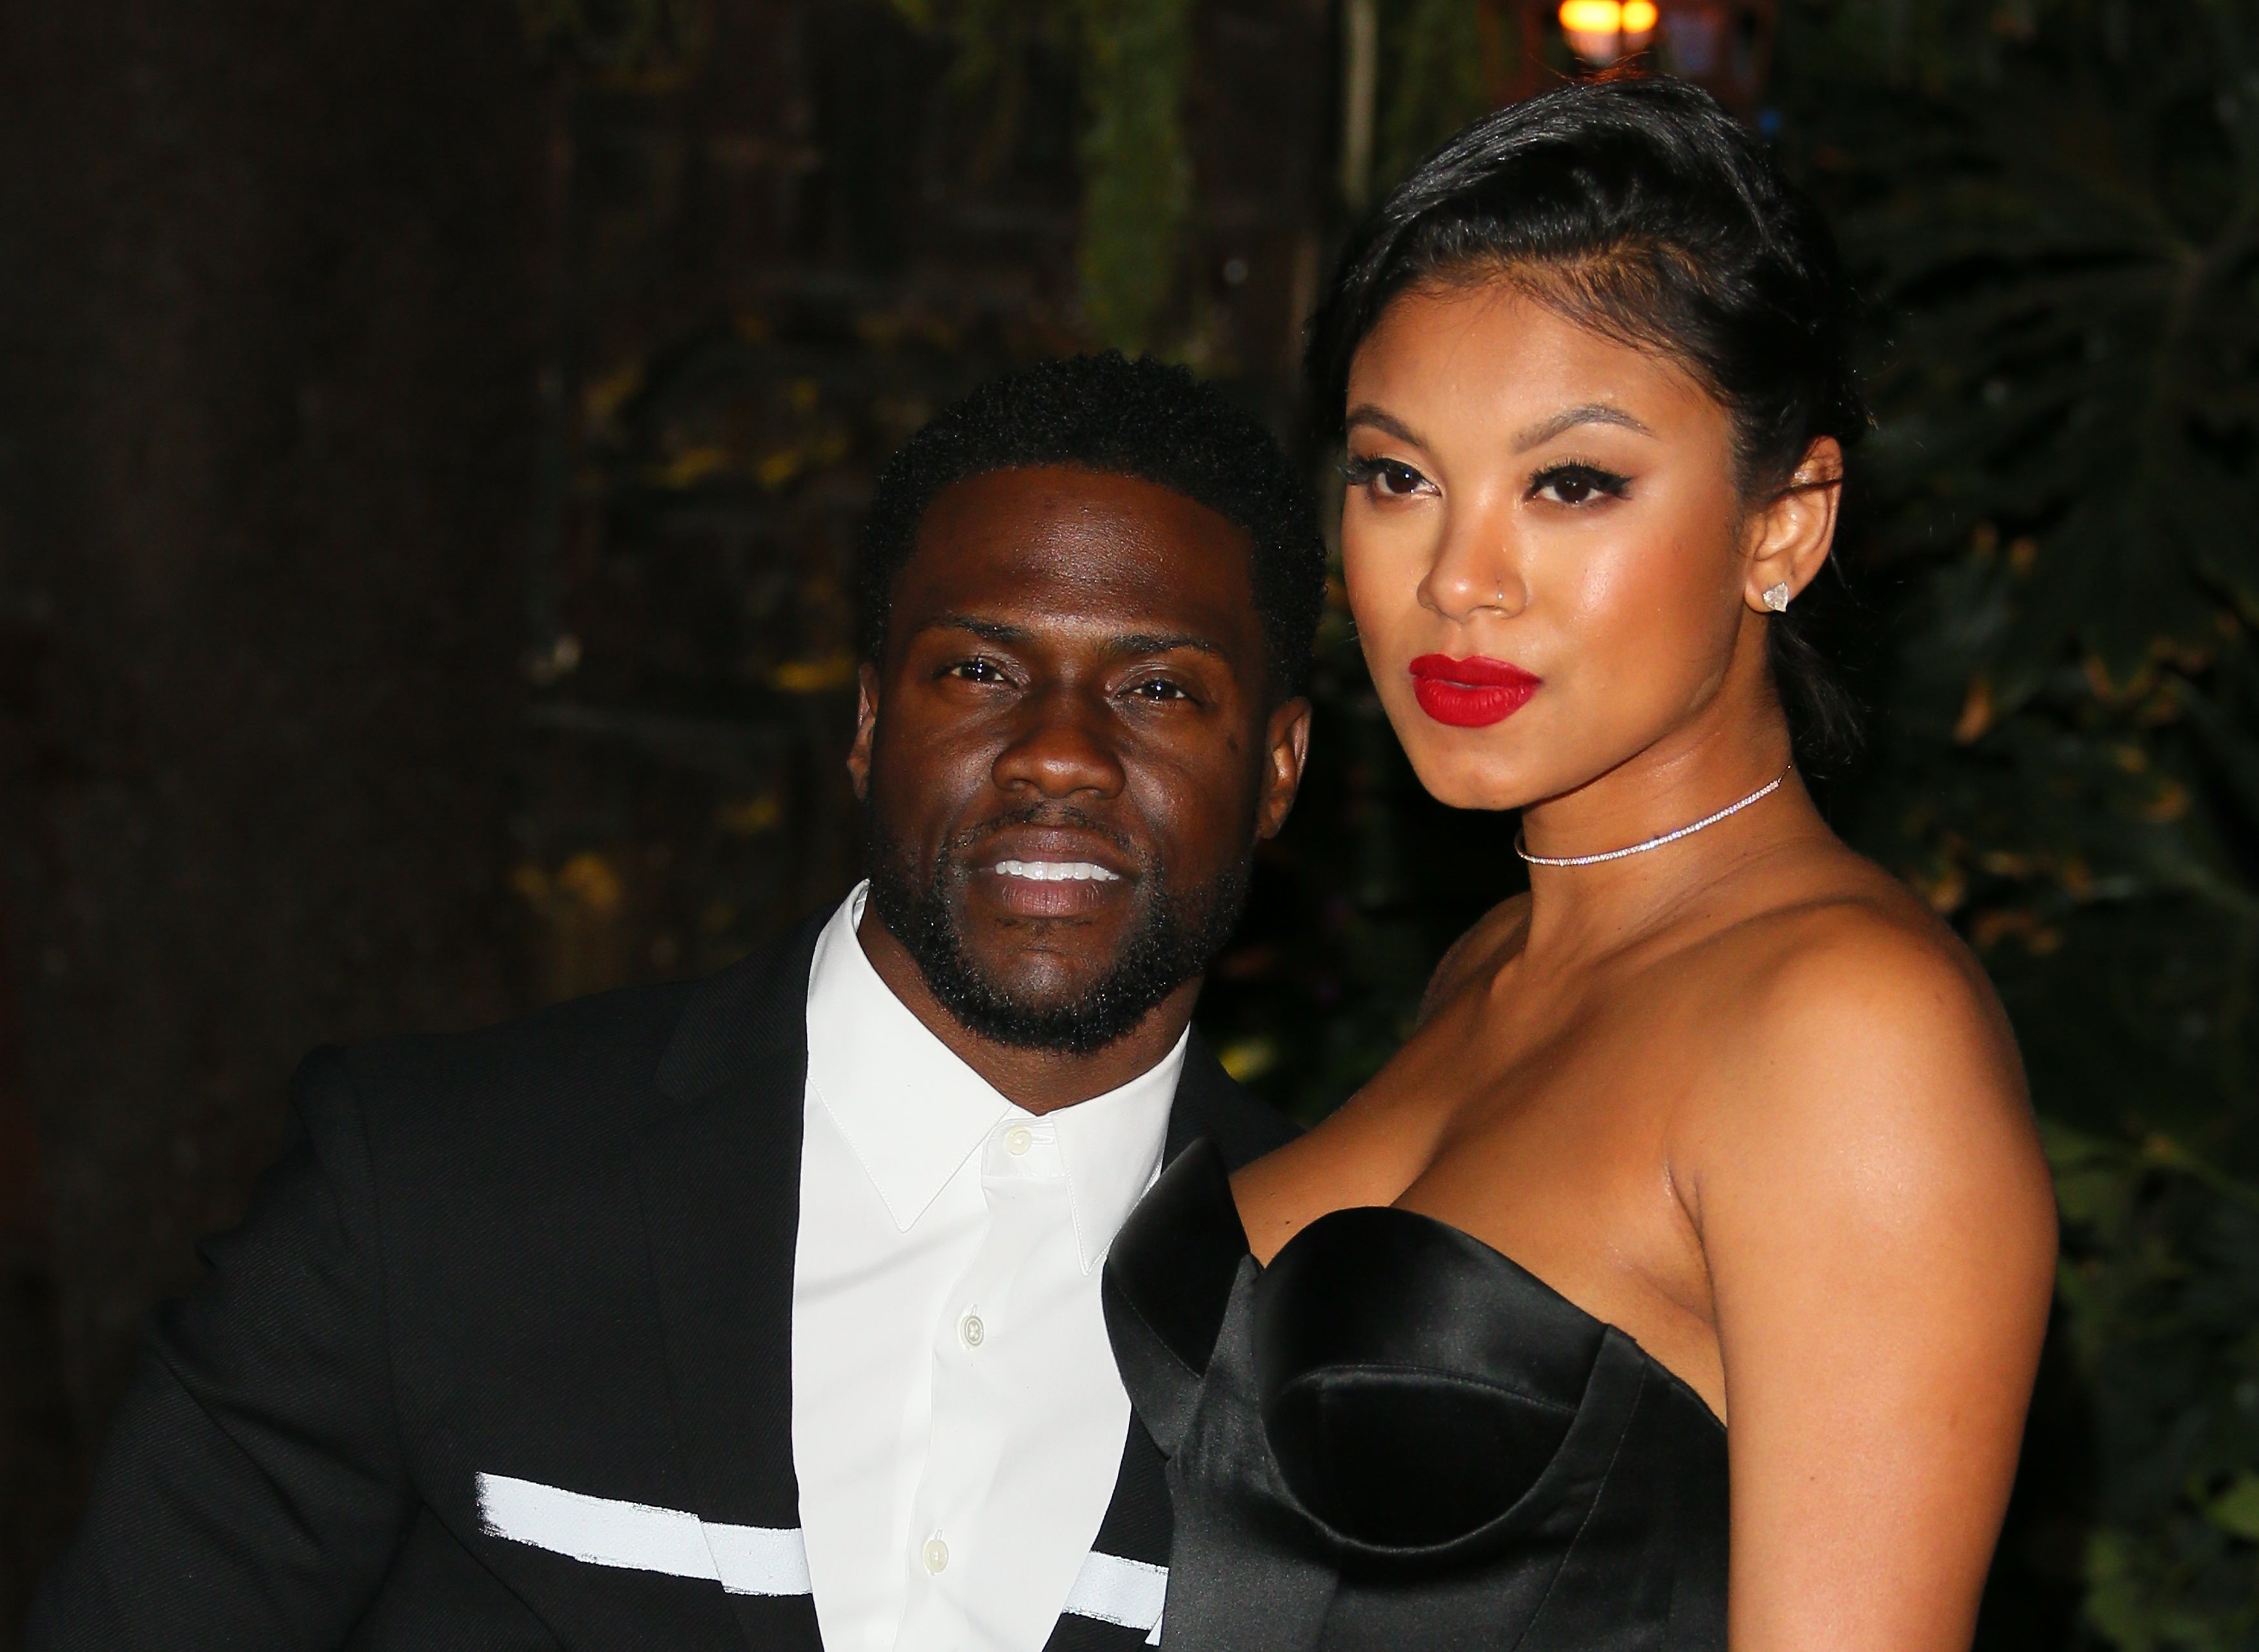 Kevin Harts Wife Eniko Found About His Cheating In An Instagram DM Essence image pic